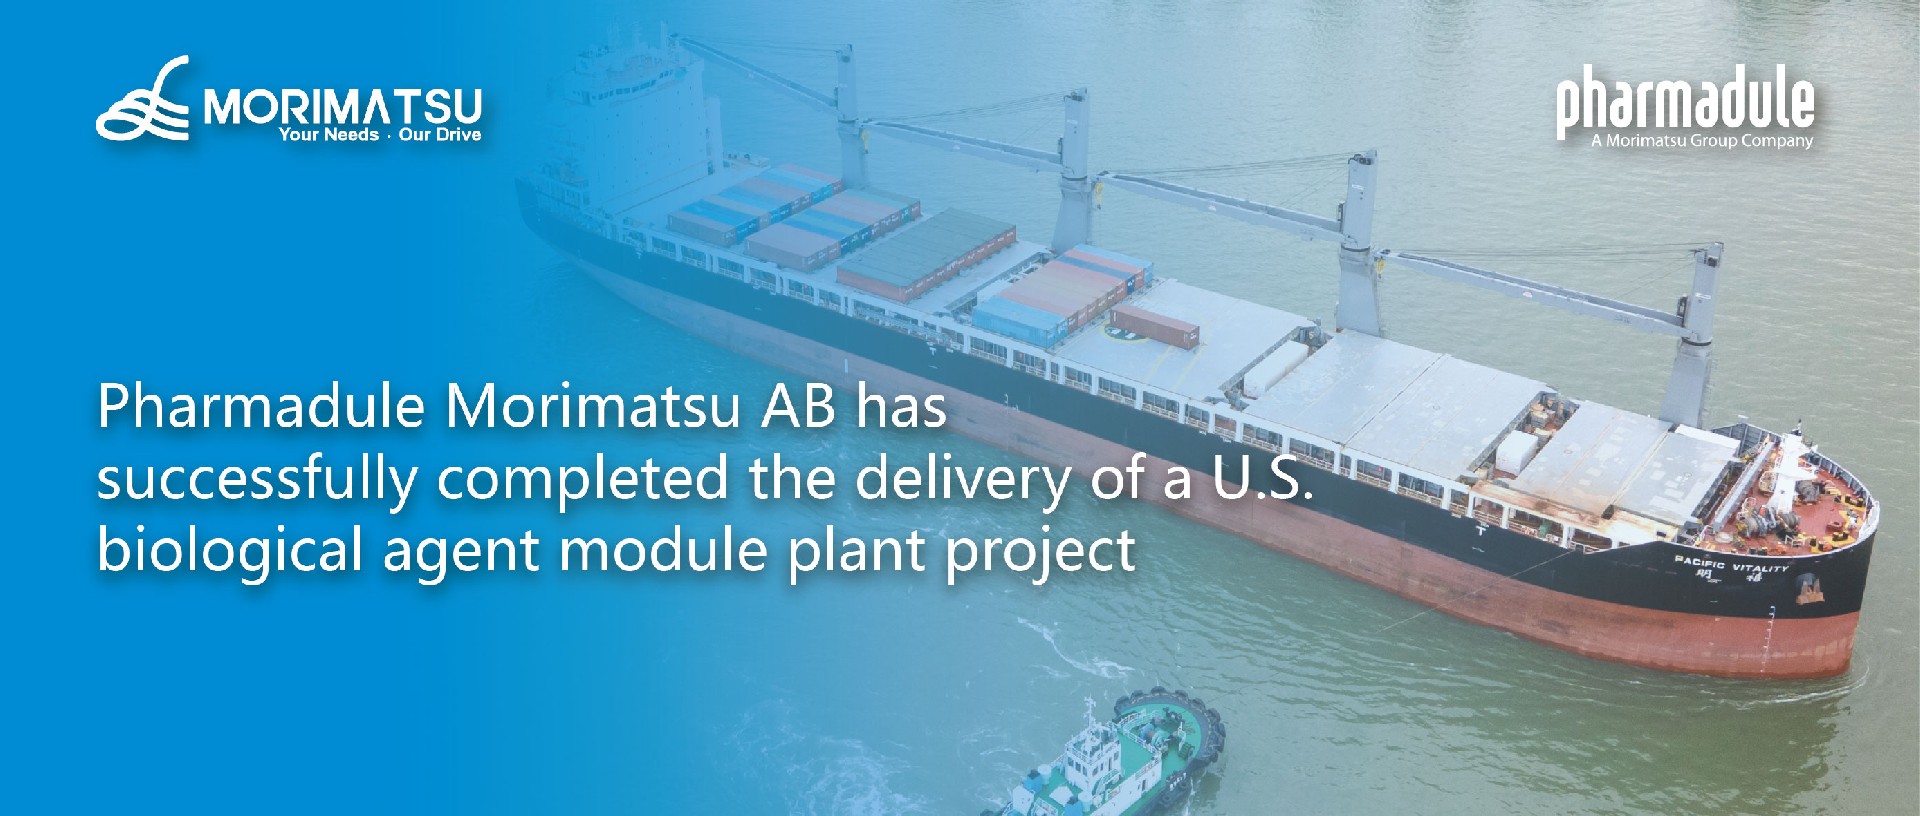 Pharmadule Morimatsu AB has successfully completed the delivery of a U.S. biological agent module plant project